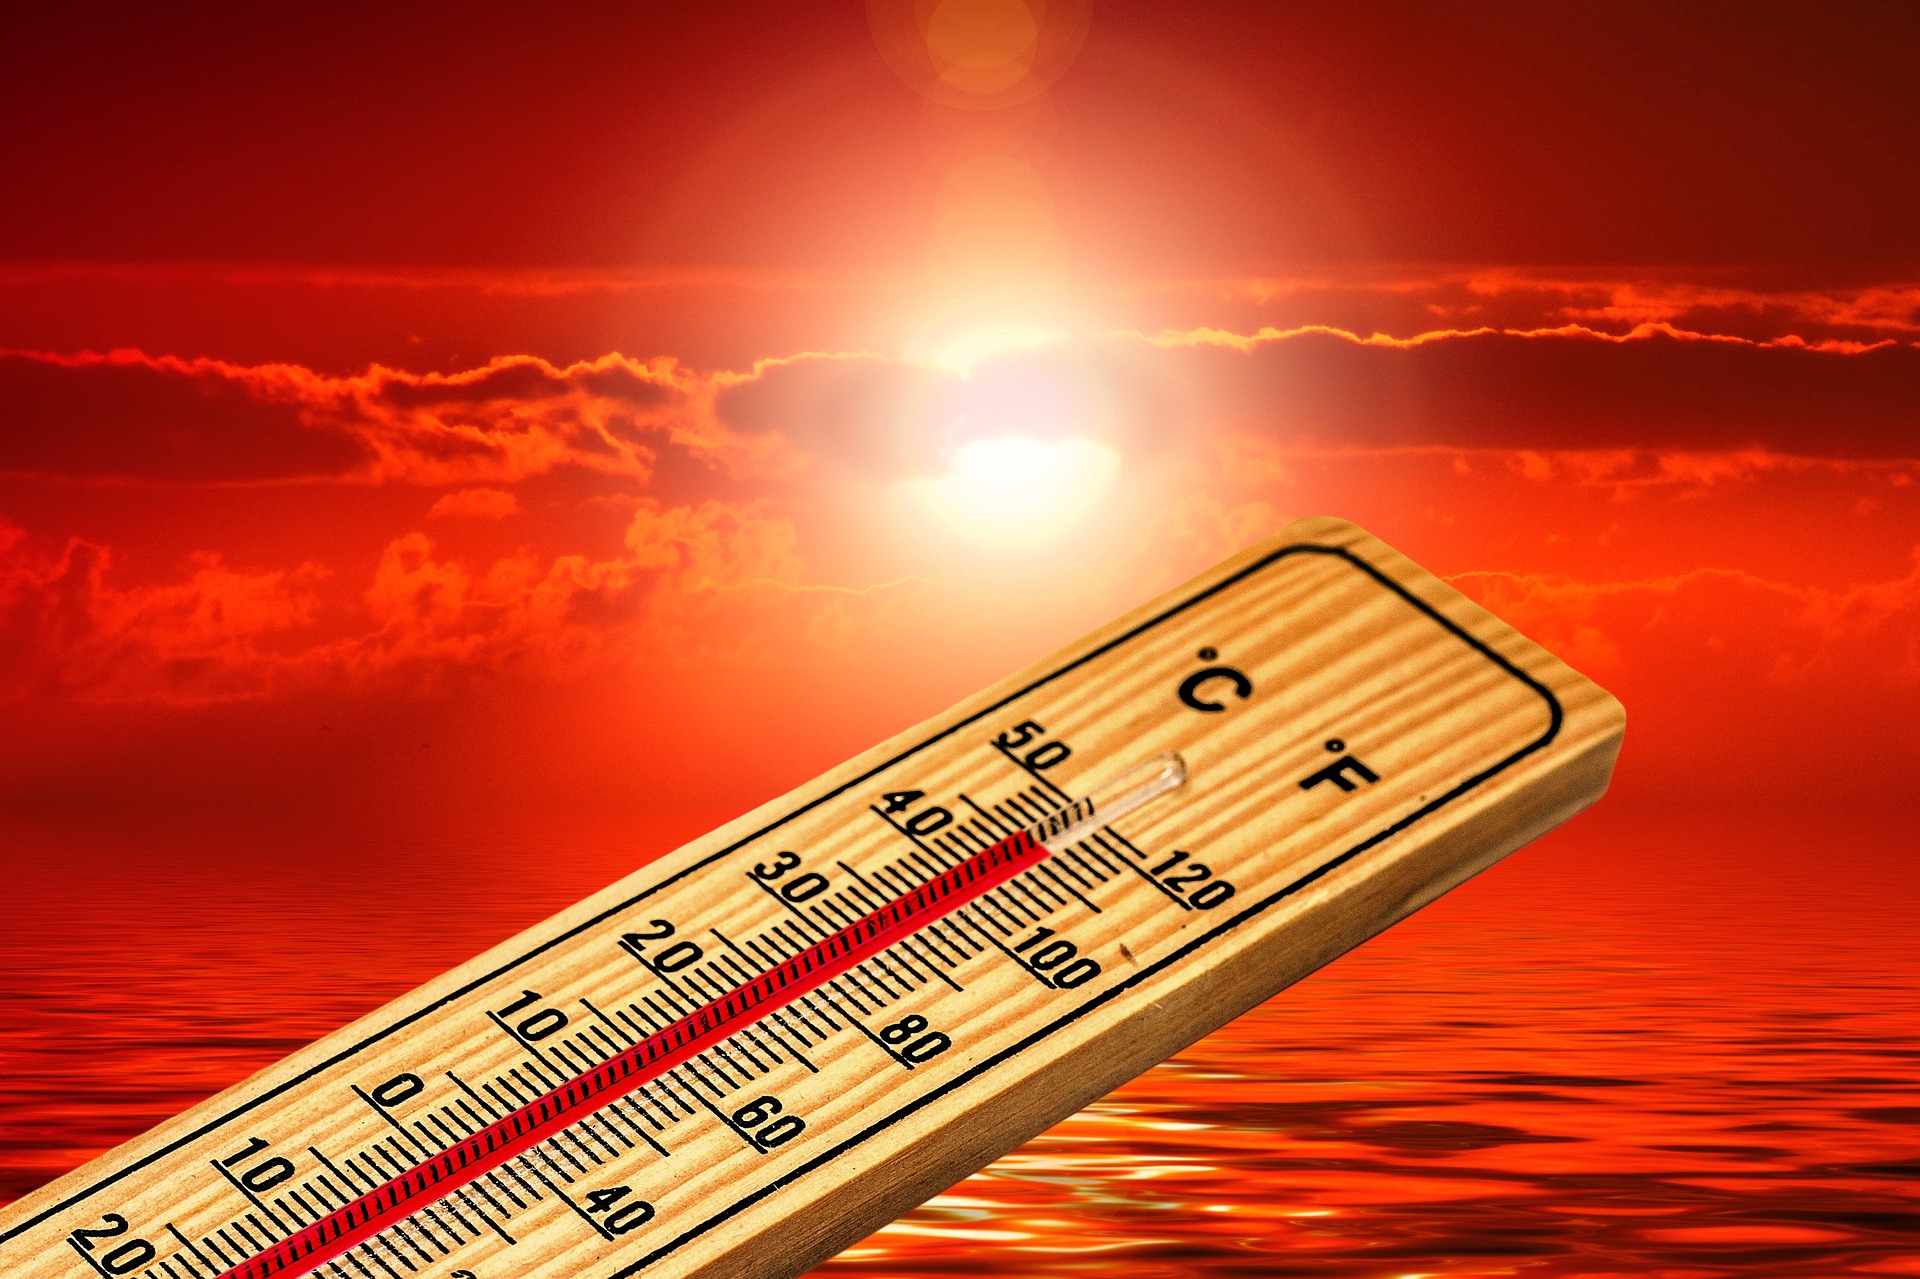 Thermometer with high, hot temperatures over an reddish-orange sunset sky and water.